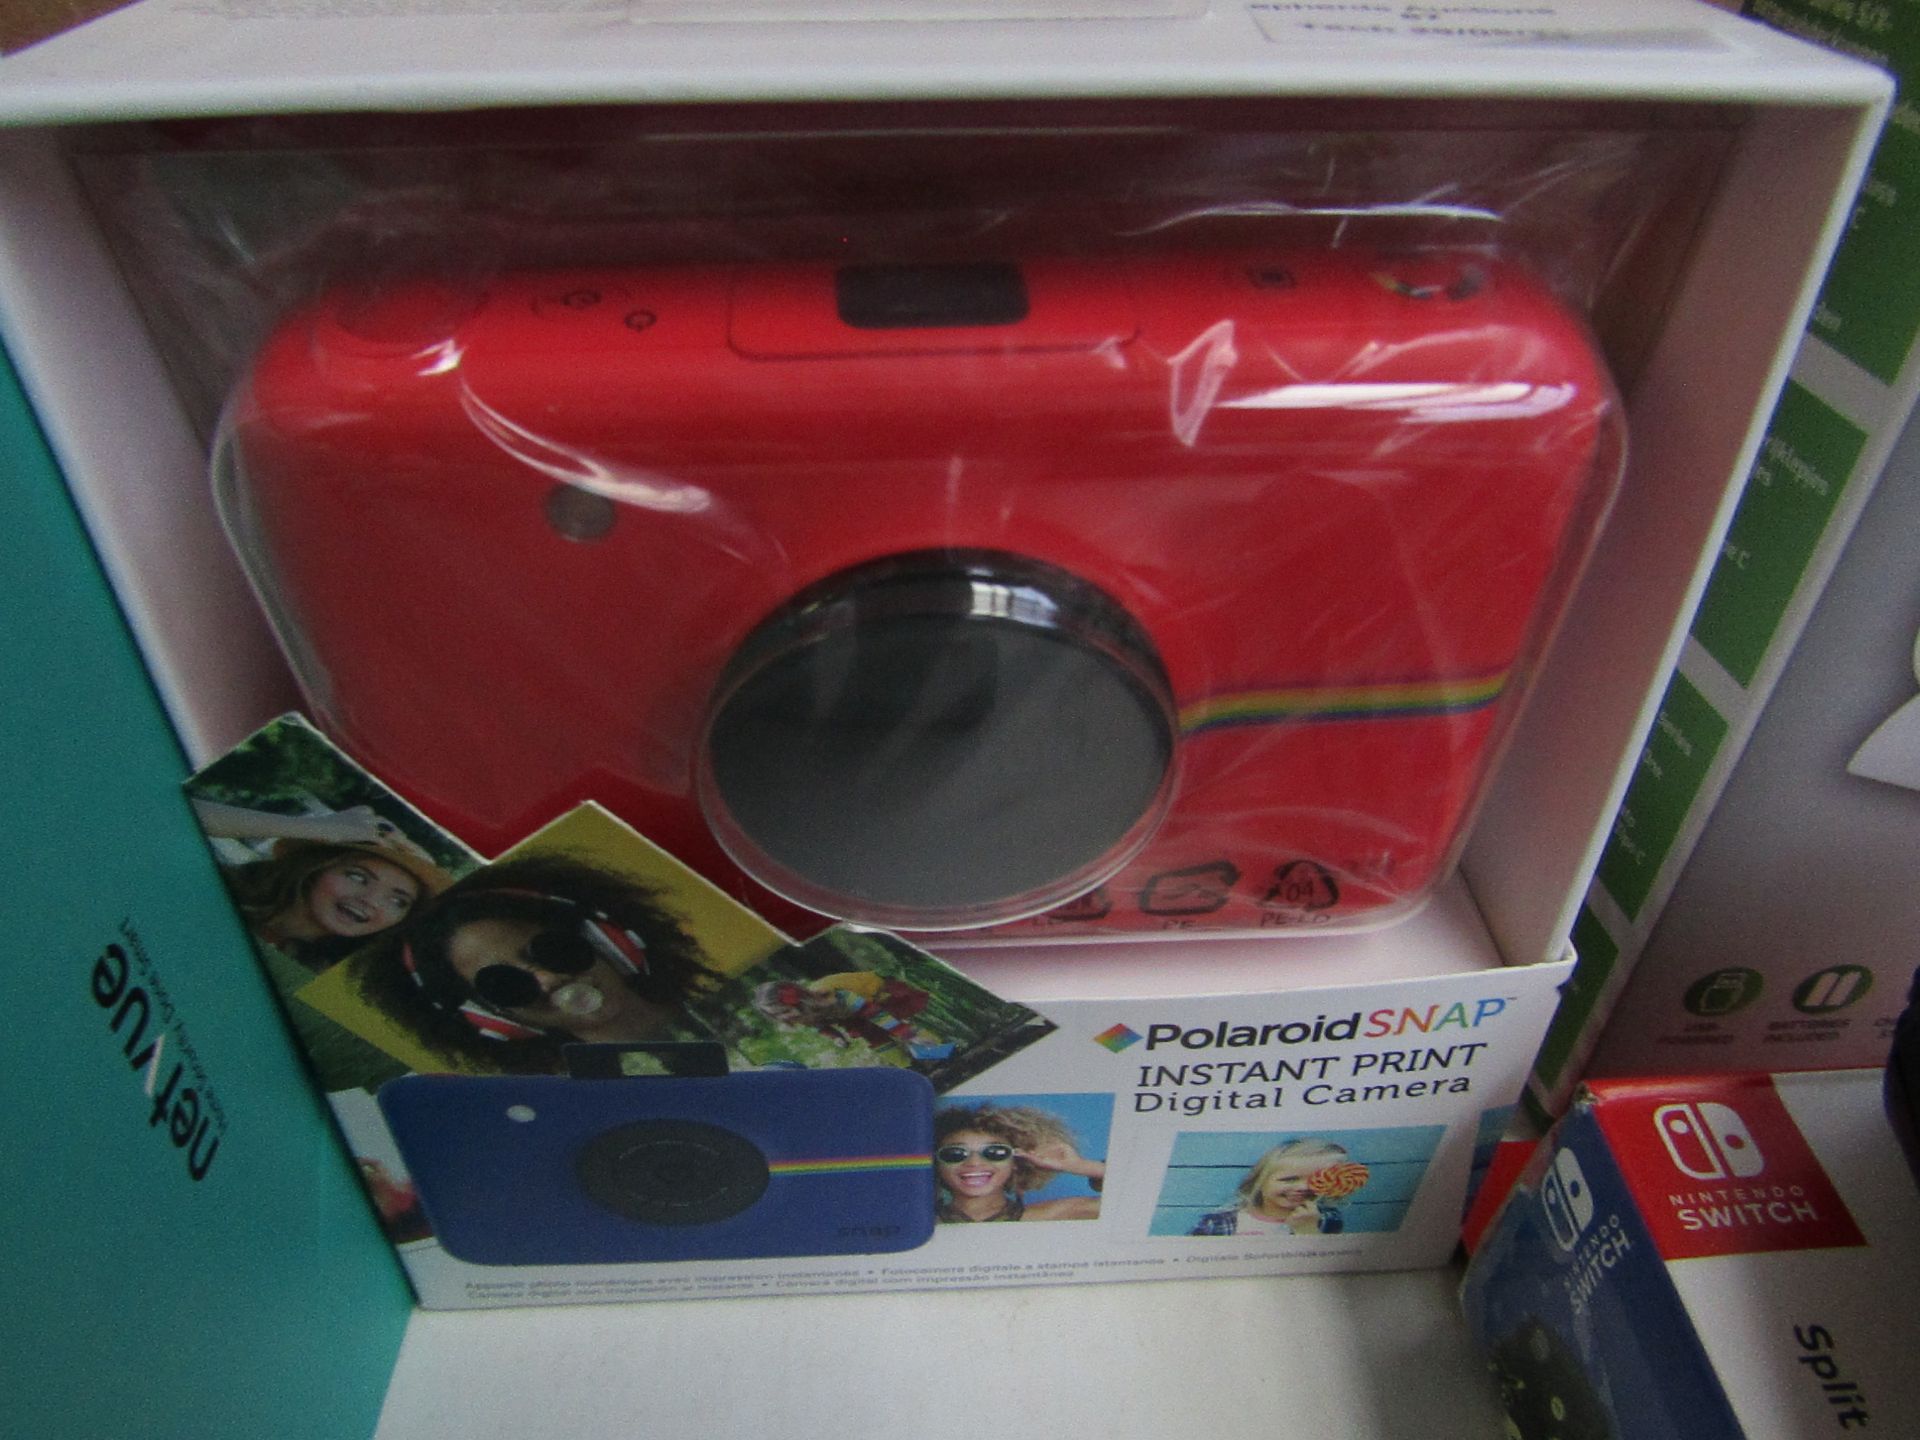 Polaroid Snap Instant camera, unchecked and boxed, RRp £84.99